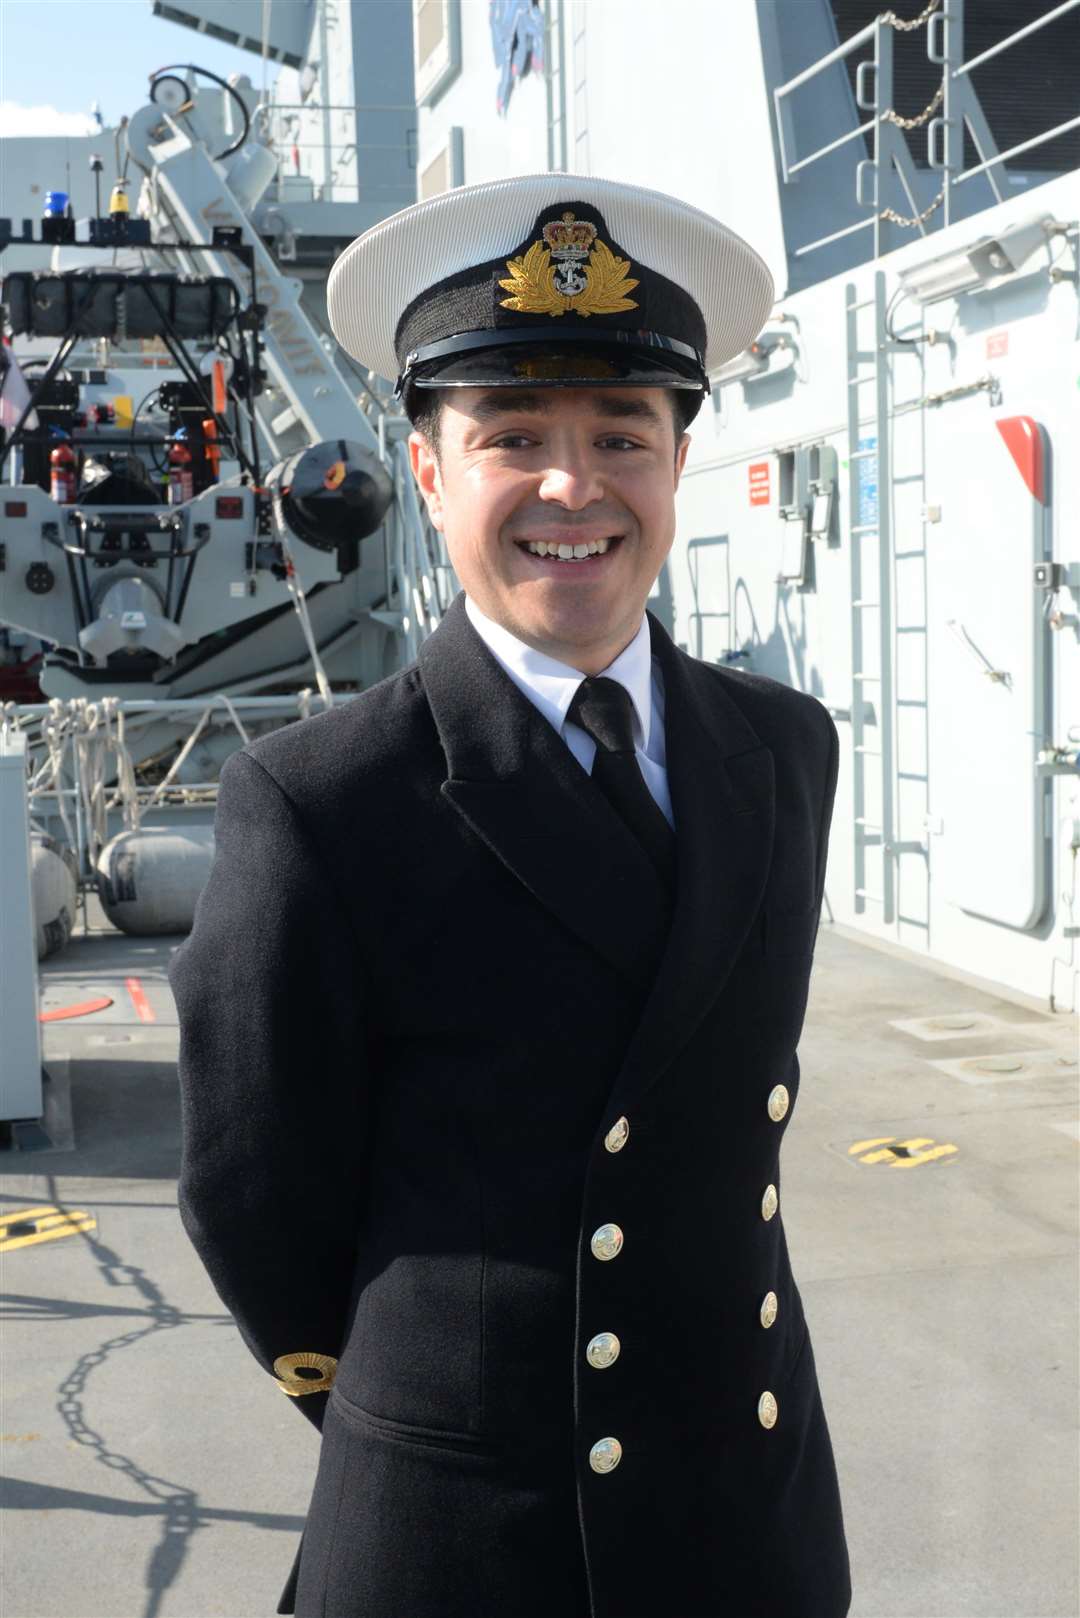 Sub Lt Luke Murphy from Canterbury onboard HMS Medway after the commisioning ceremony at the Chatham Historic Dockyard on Thursday. Picture:Chris Davey. (16979249)